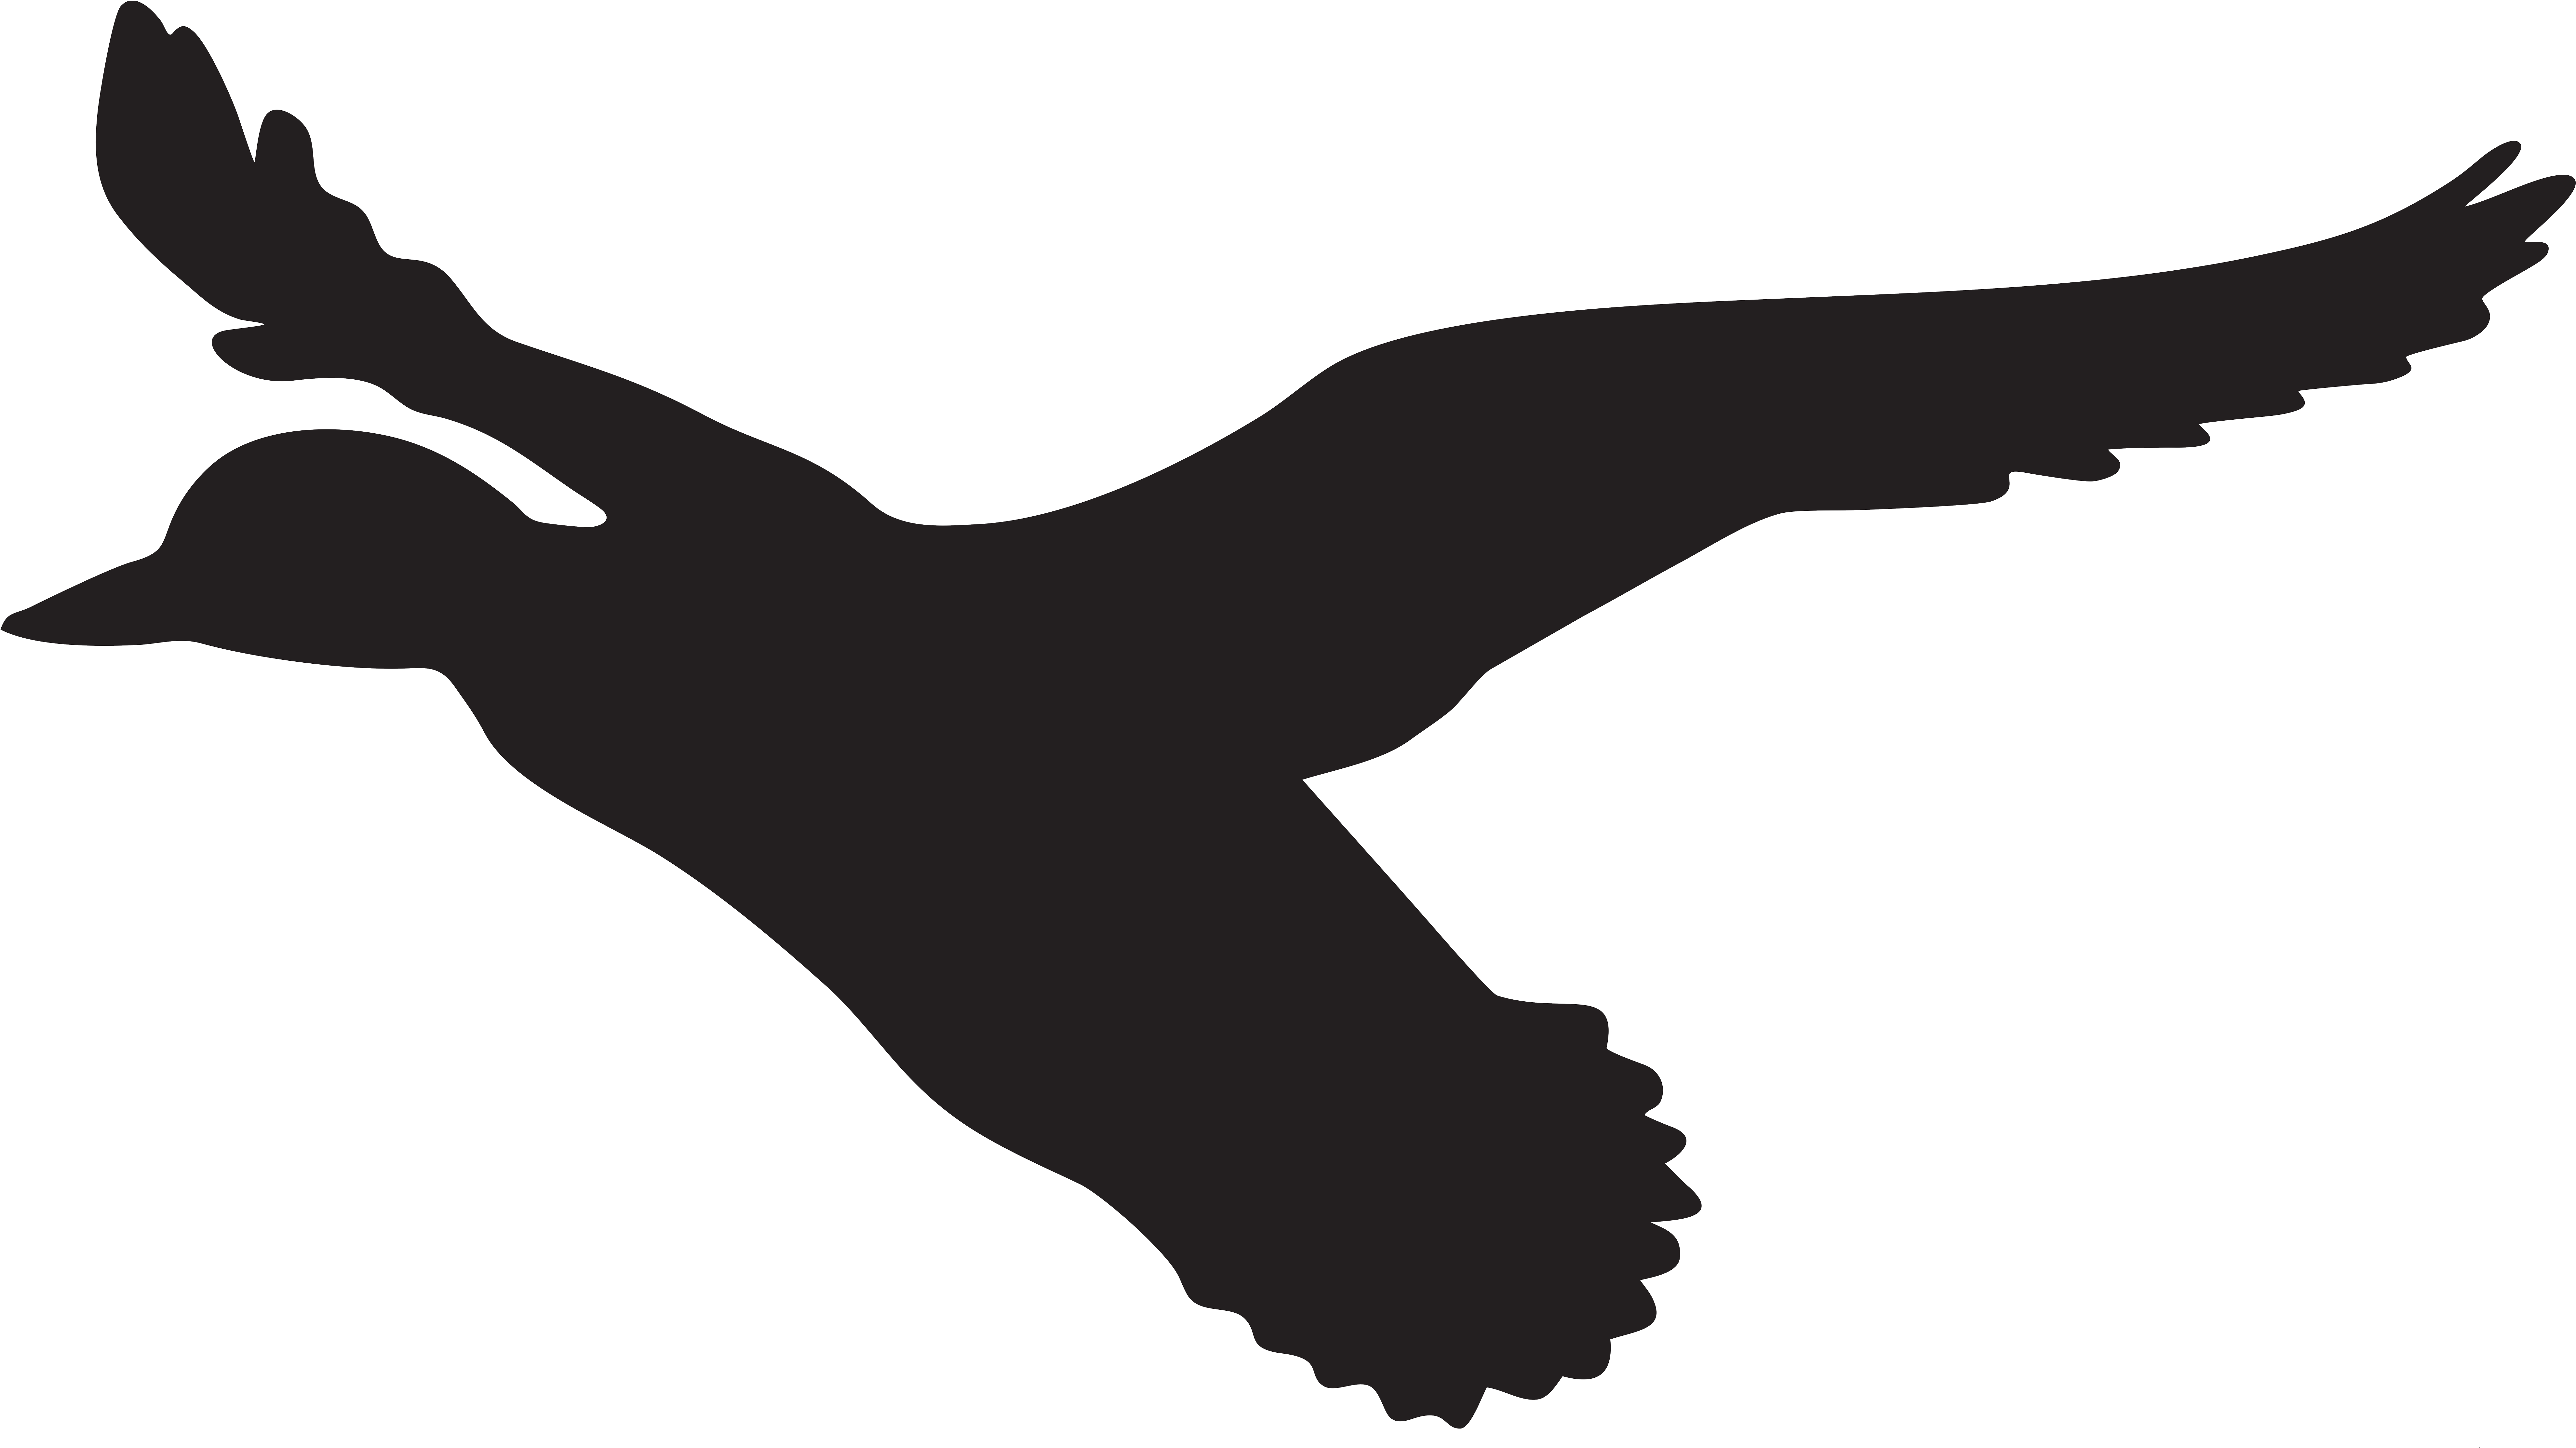 Flying Duck Silhouette Png Clip Art Imageu200b Gallery